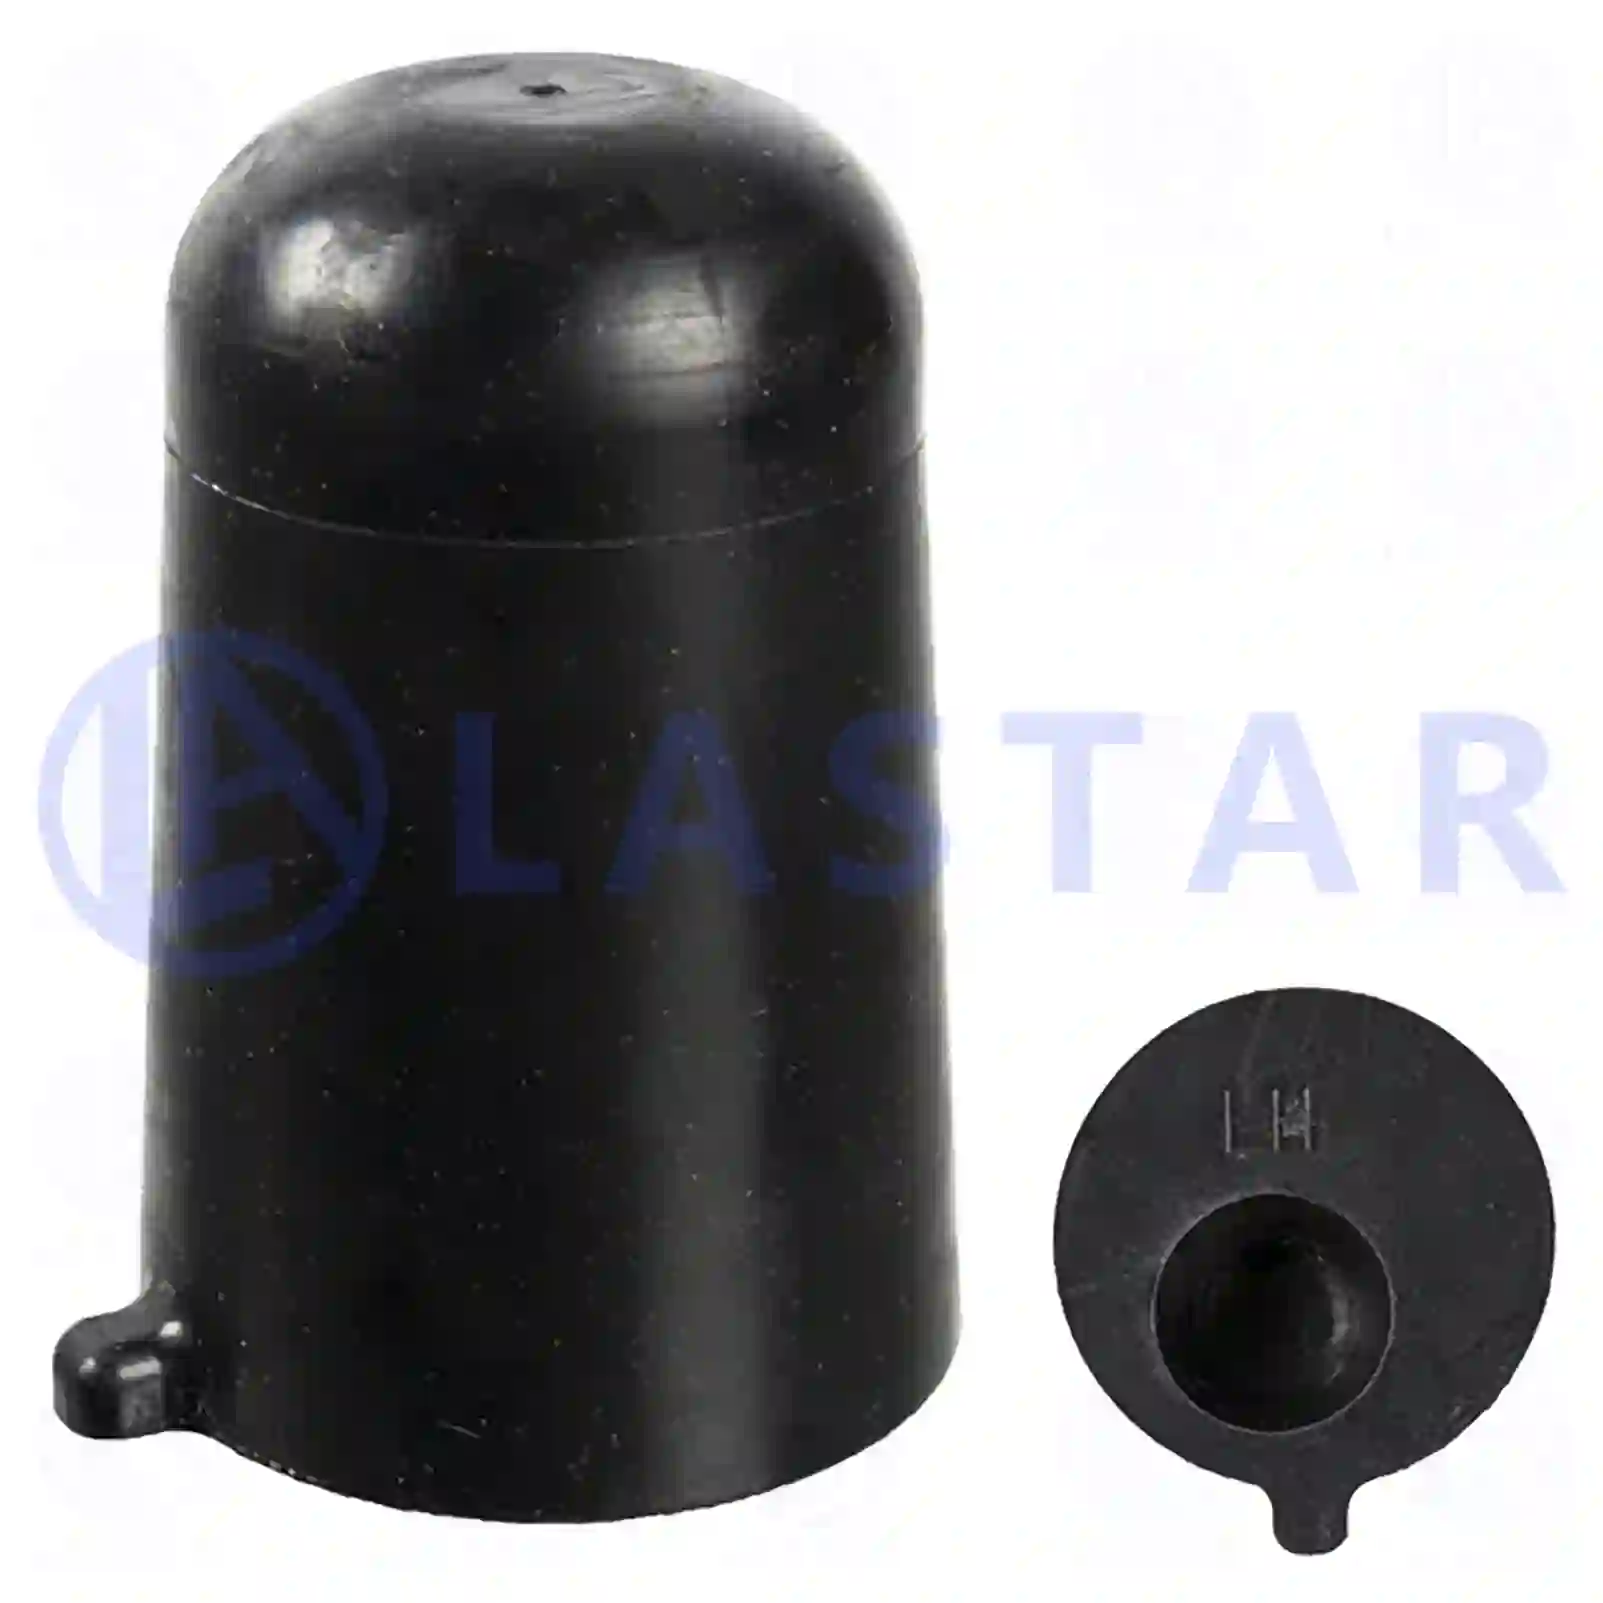 Rubber buffer, leaf spring, 77730159, 1322341, ZG41459-0008, ||  77730159 Lastar Spare Part | Truck Spare Parts, Auotomotive Spare Parts Rubber buffer, leaf spring, 77730159, 1322341, ZG41459-0008, ||  77730159 Lastar Spare Part | Truck Spare Parts, Auotomotive Spare Parts